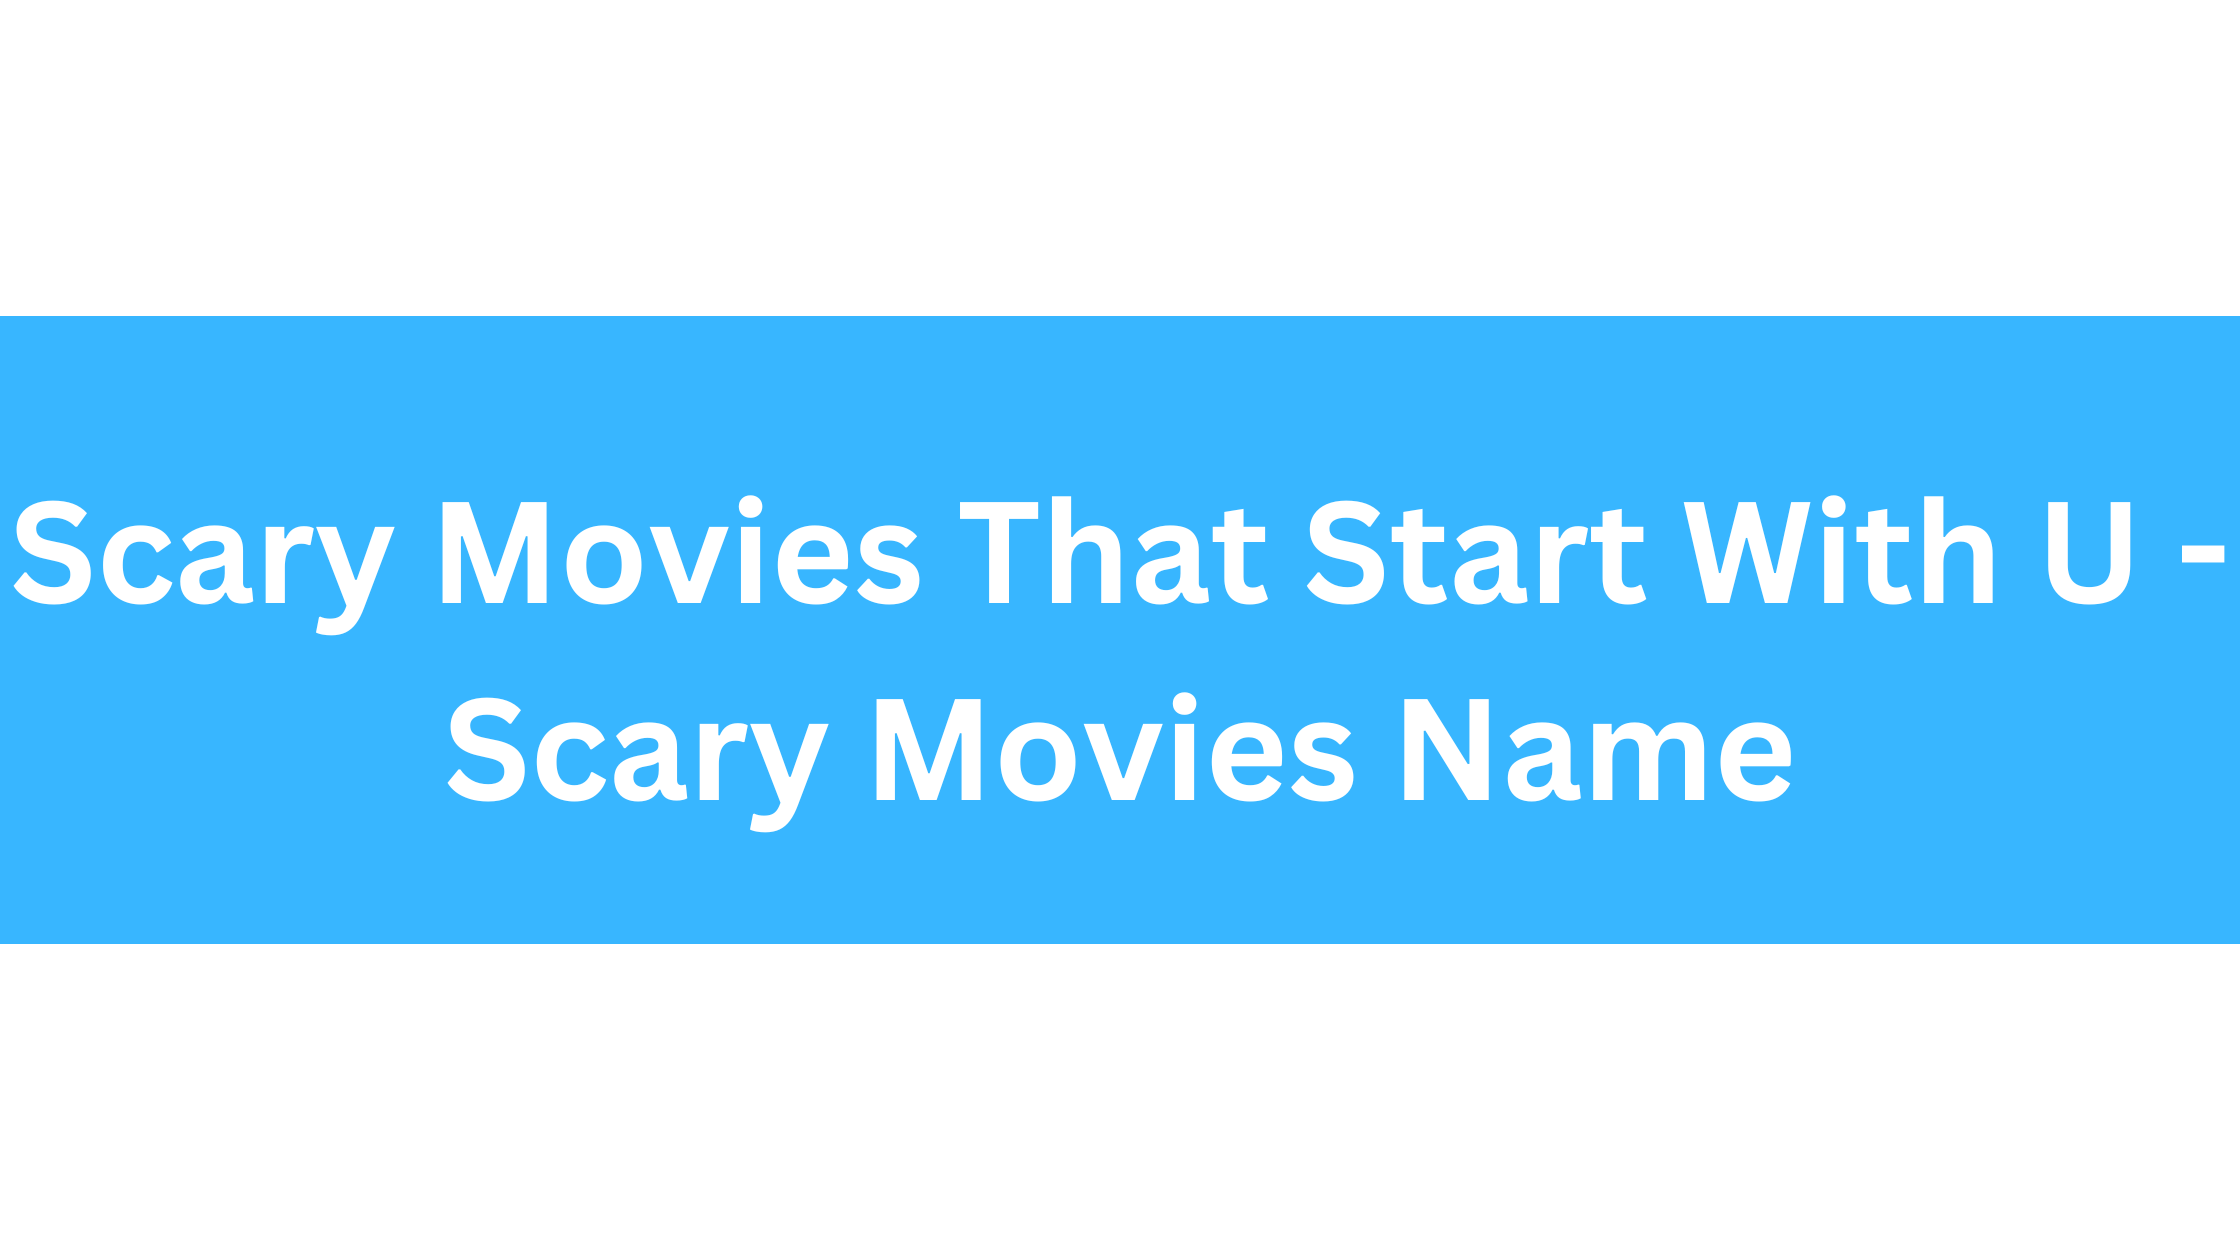 Scary Movies That Start With U